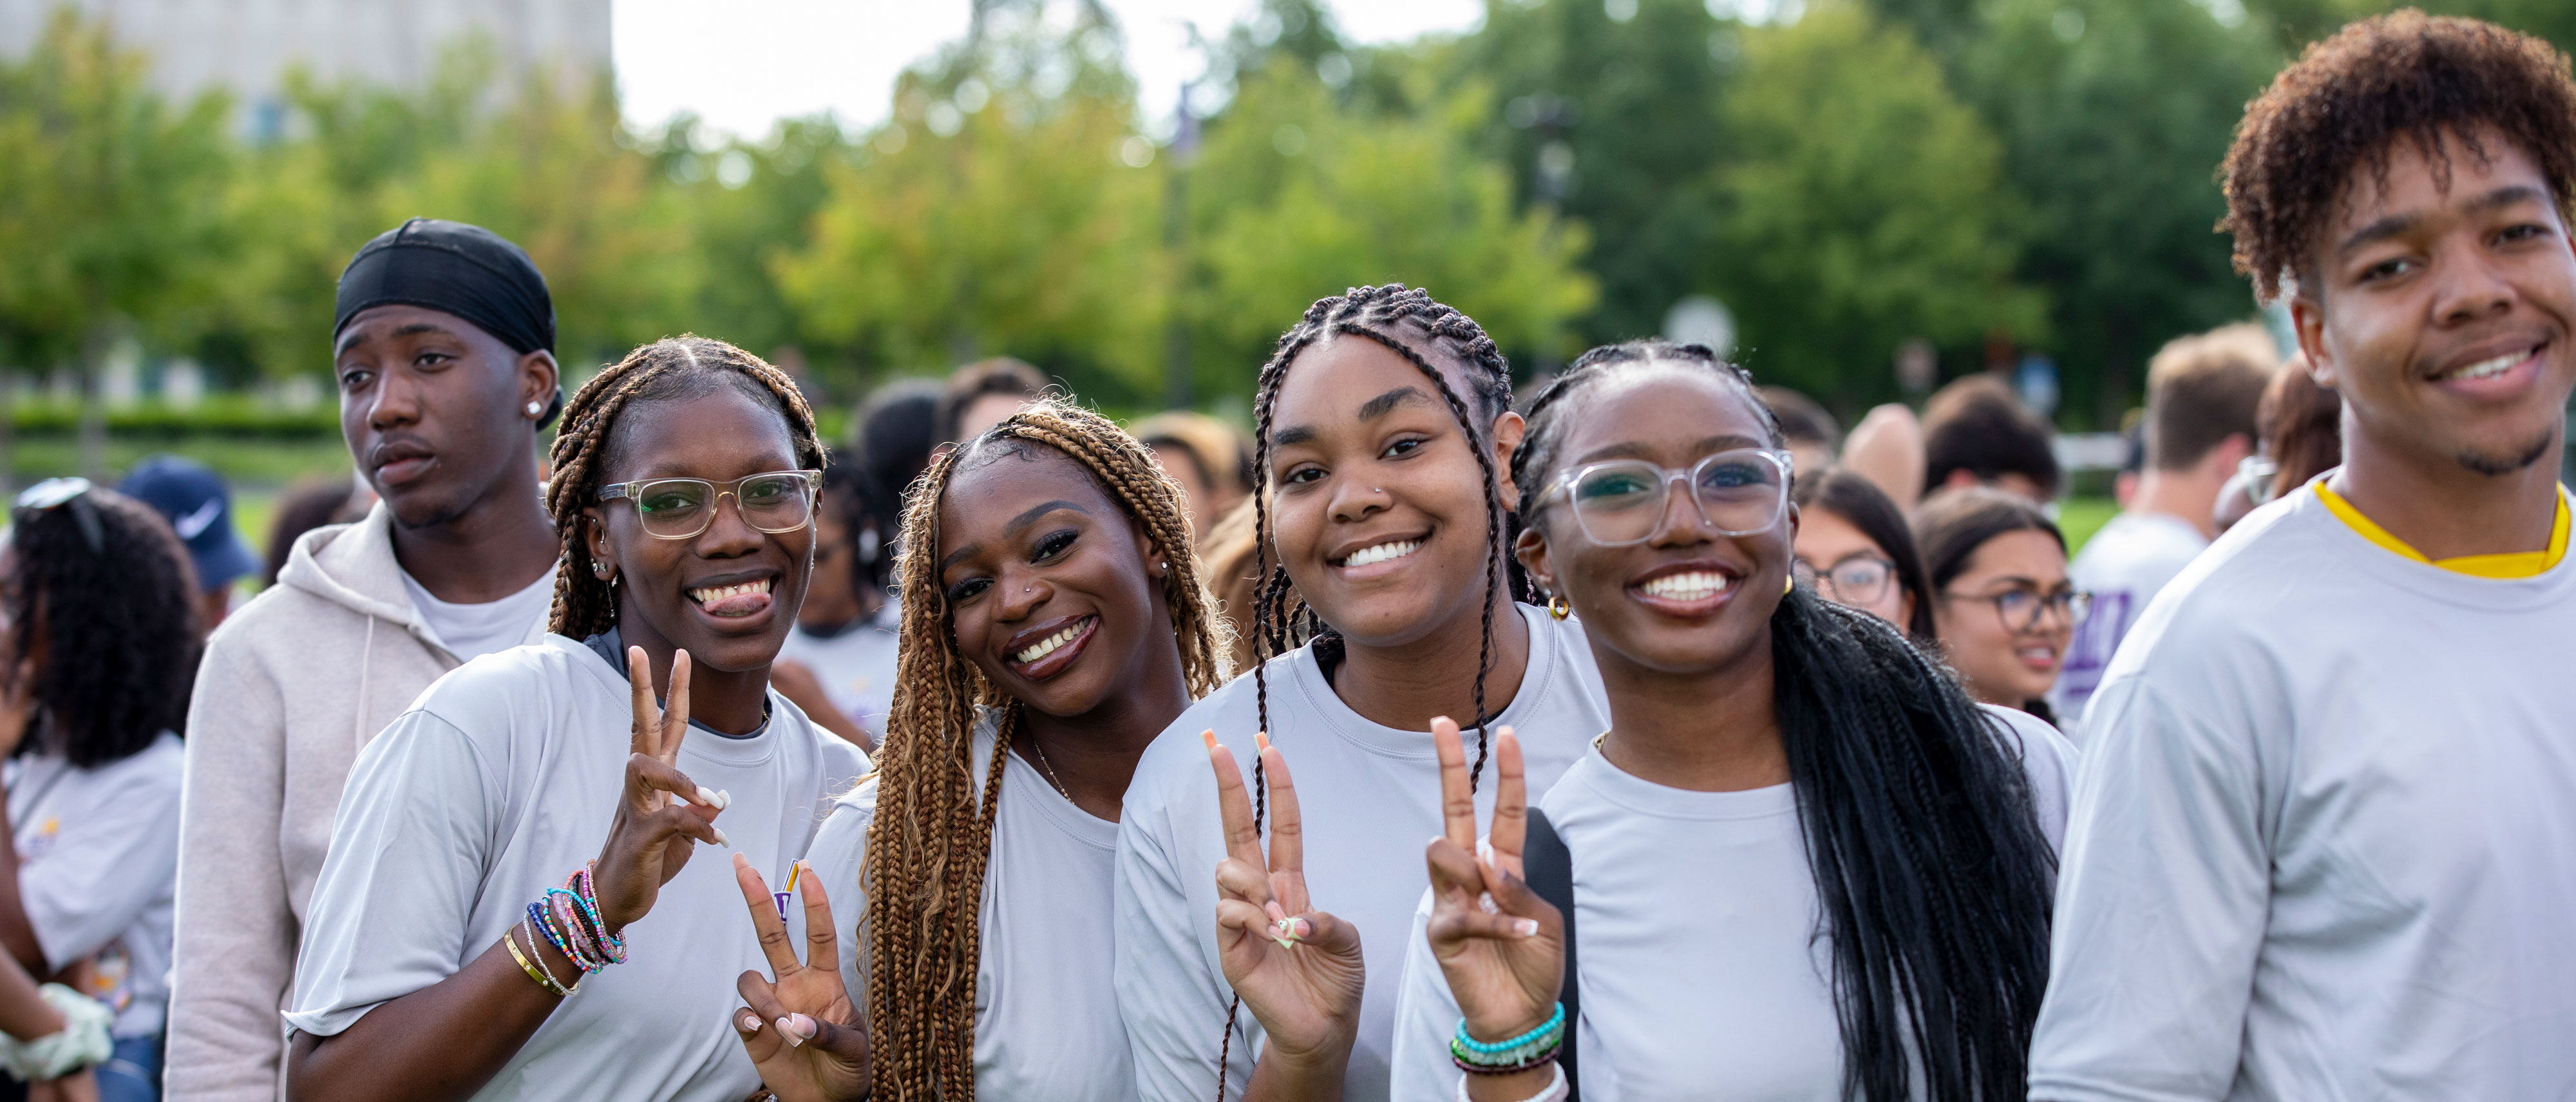 Six Black students wearing matching light gray t-shirts smile and pose for a photo. Four of the students hold up peace signs.